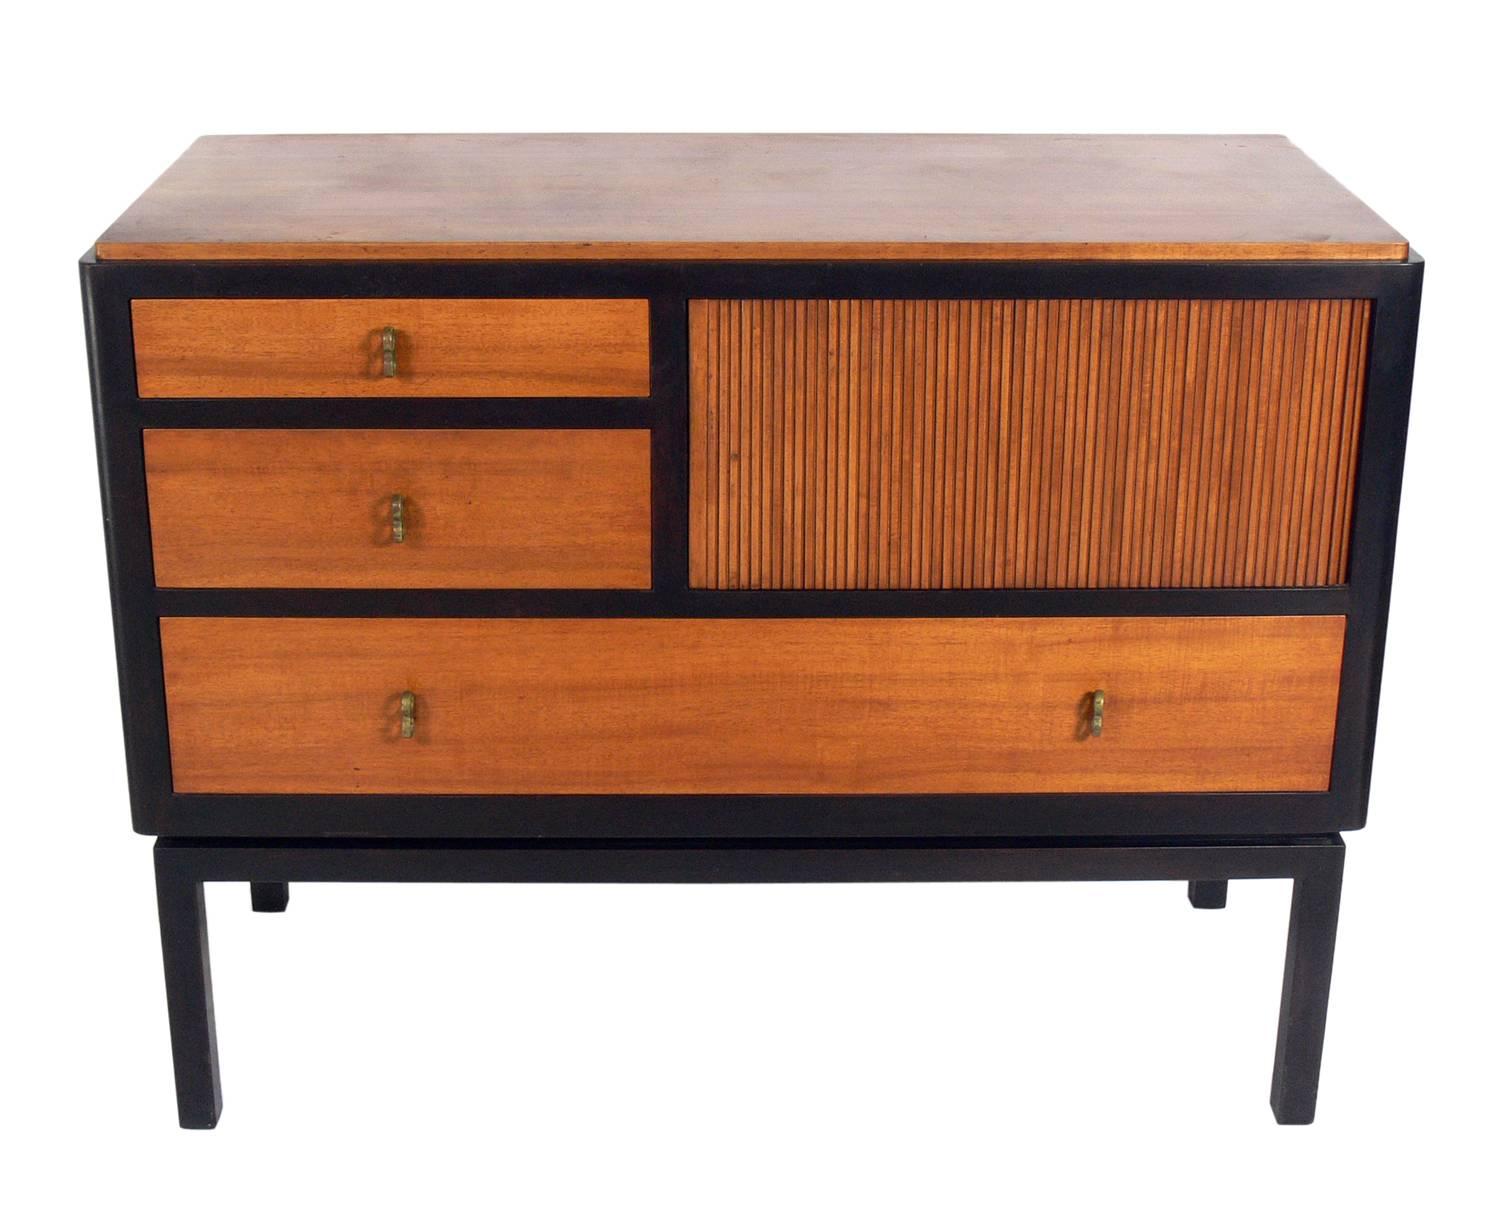 Rare Dunbar cabinet, model 5464, designed by Edward Wormley for Dunbar, circa 1950s. It is a versatile size and can be used as a credenza, cabinet, bar, or media cabinet in a living area, or a dresser or chest in a bedroom. The cabinet features